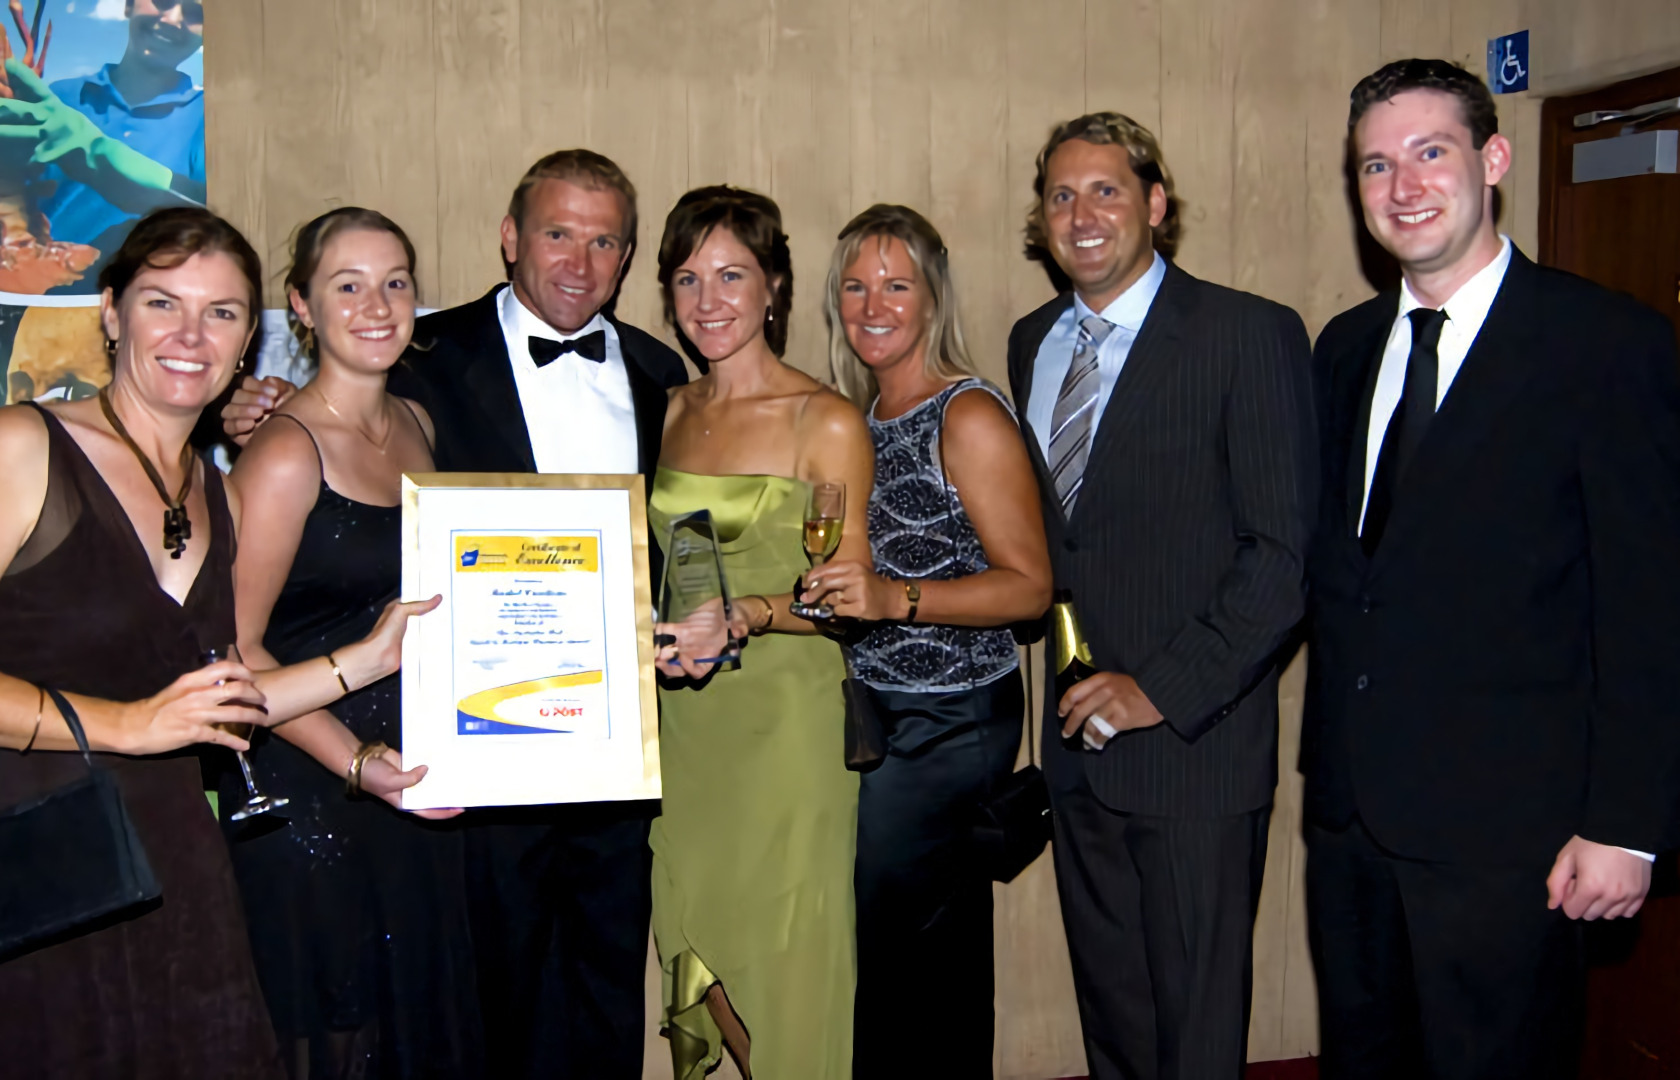 Market Creations takes home MWCCI Business of the Year Award 2006-2007 presented by Chris Mainwaring. I'm on the far right.